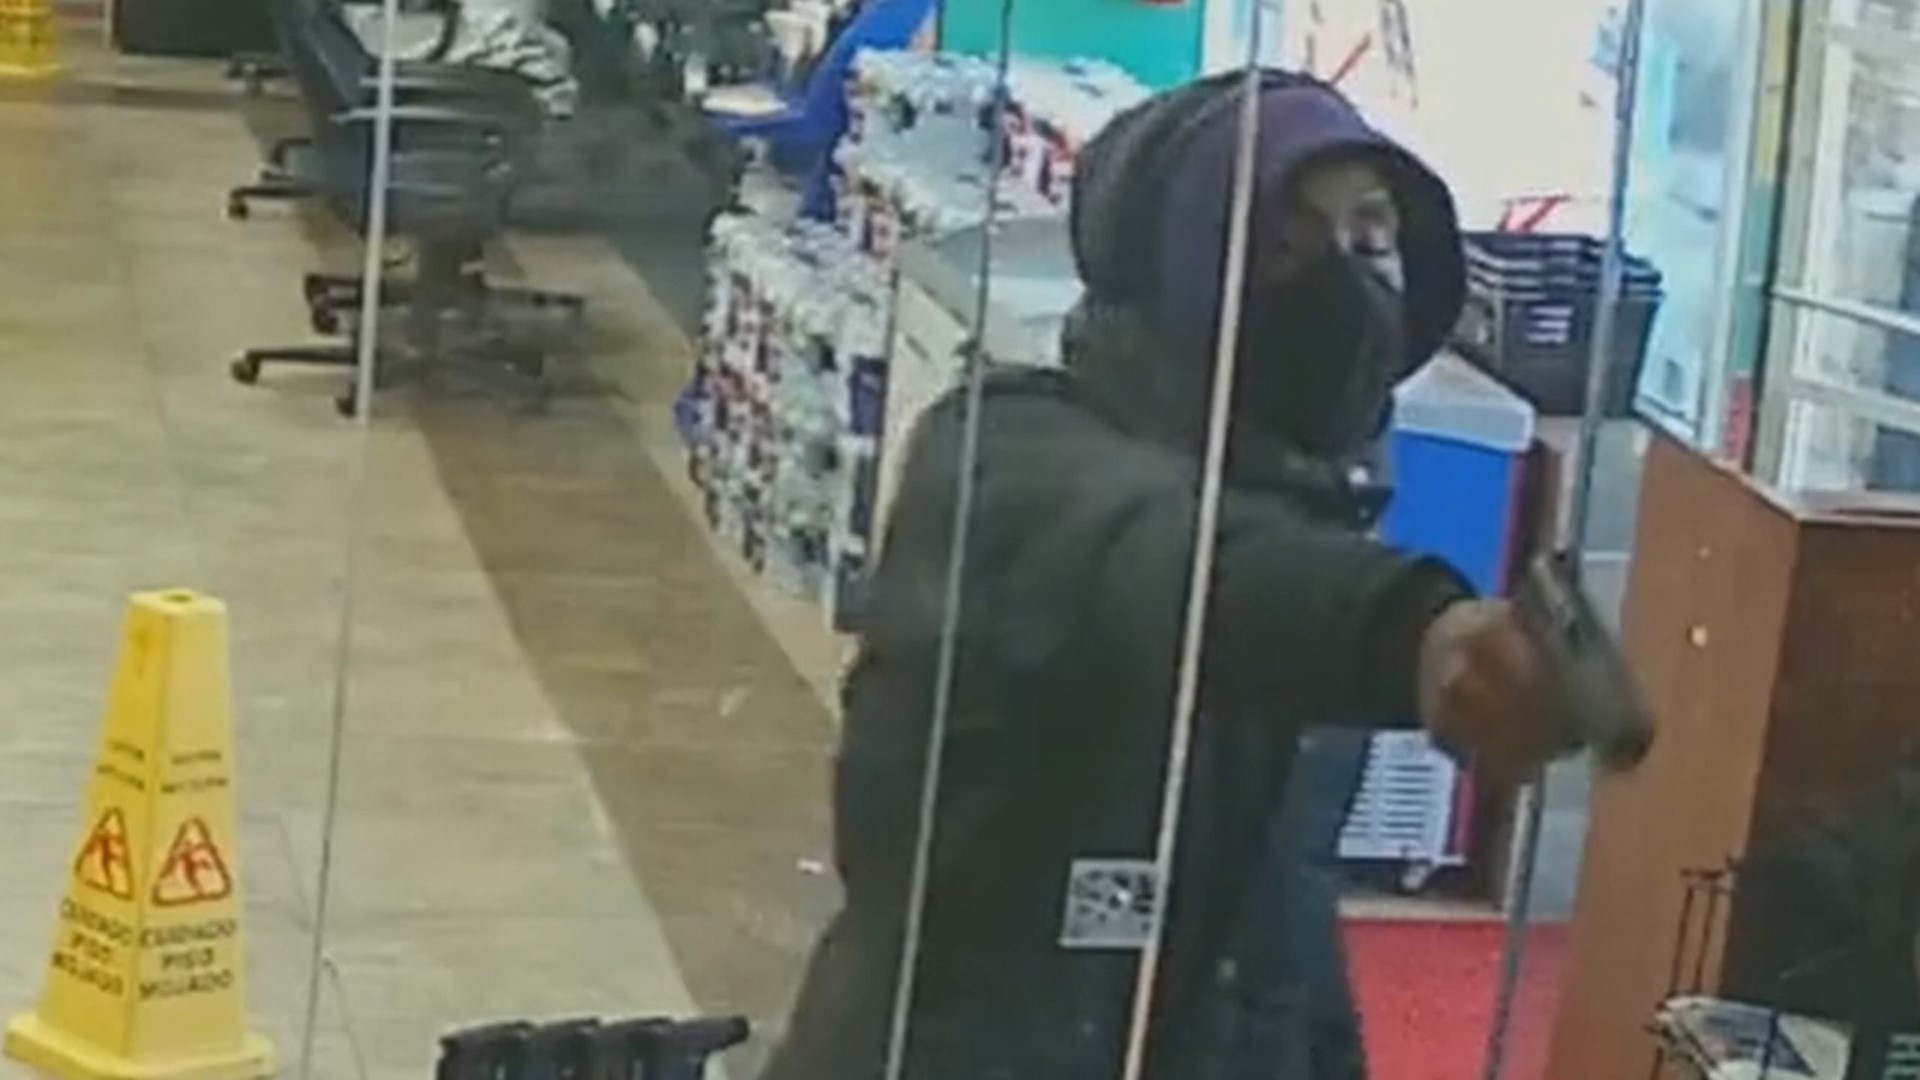 Police are searching for a suspect wanted in connection with the fatal shooting of a store clerk over the weekend in northeast Houston.